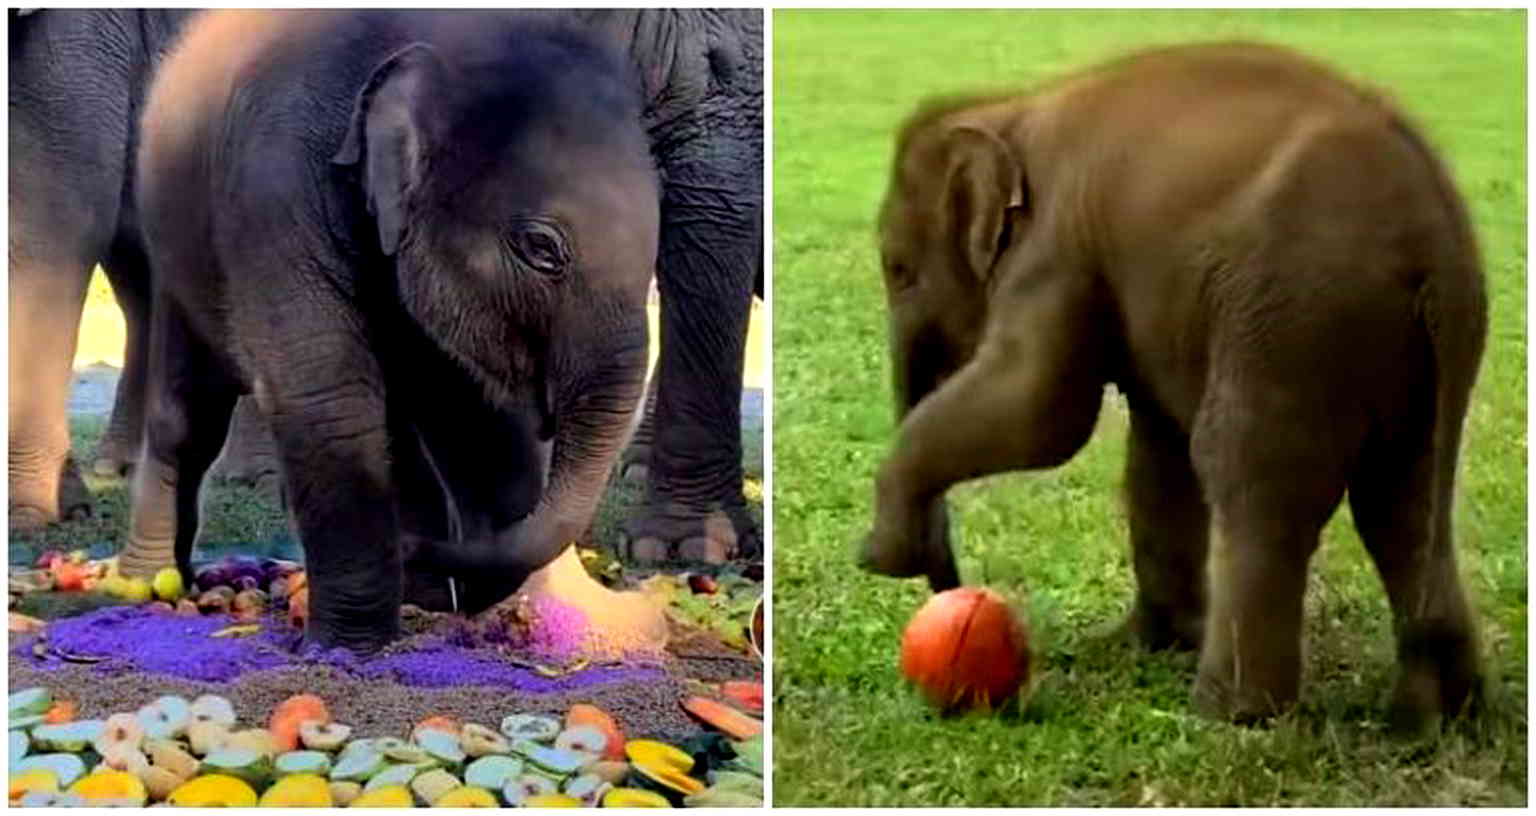 Pyi Mai the Asian elephant warms hearts in viral video of her first birthday celebration